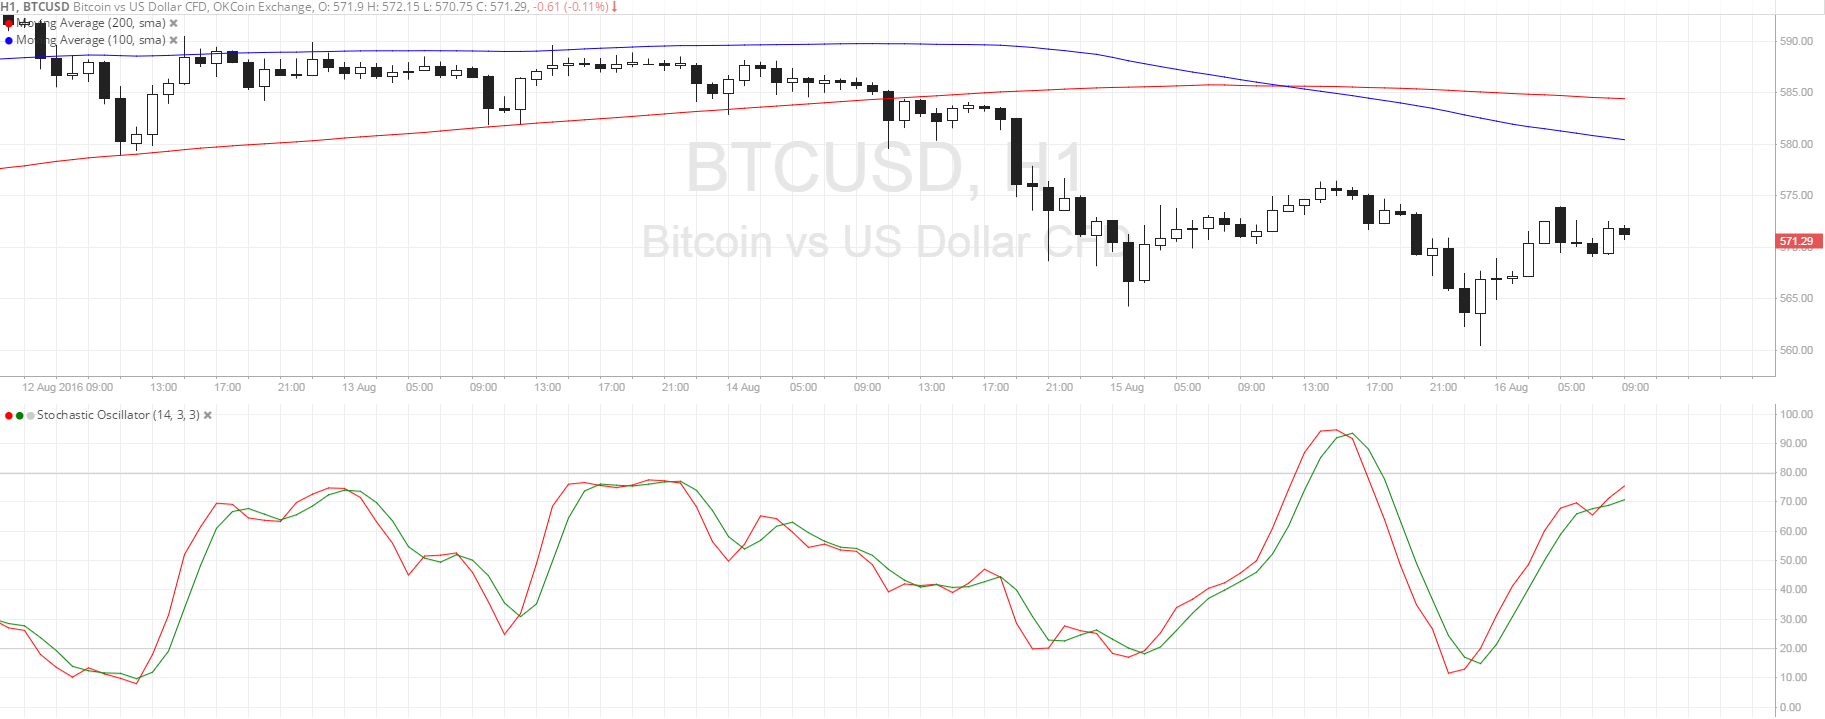 Bitcoin Price Technical Analysis for 08/16/2016 - Short-Term Reversal Pattern?